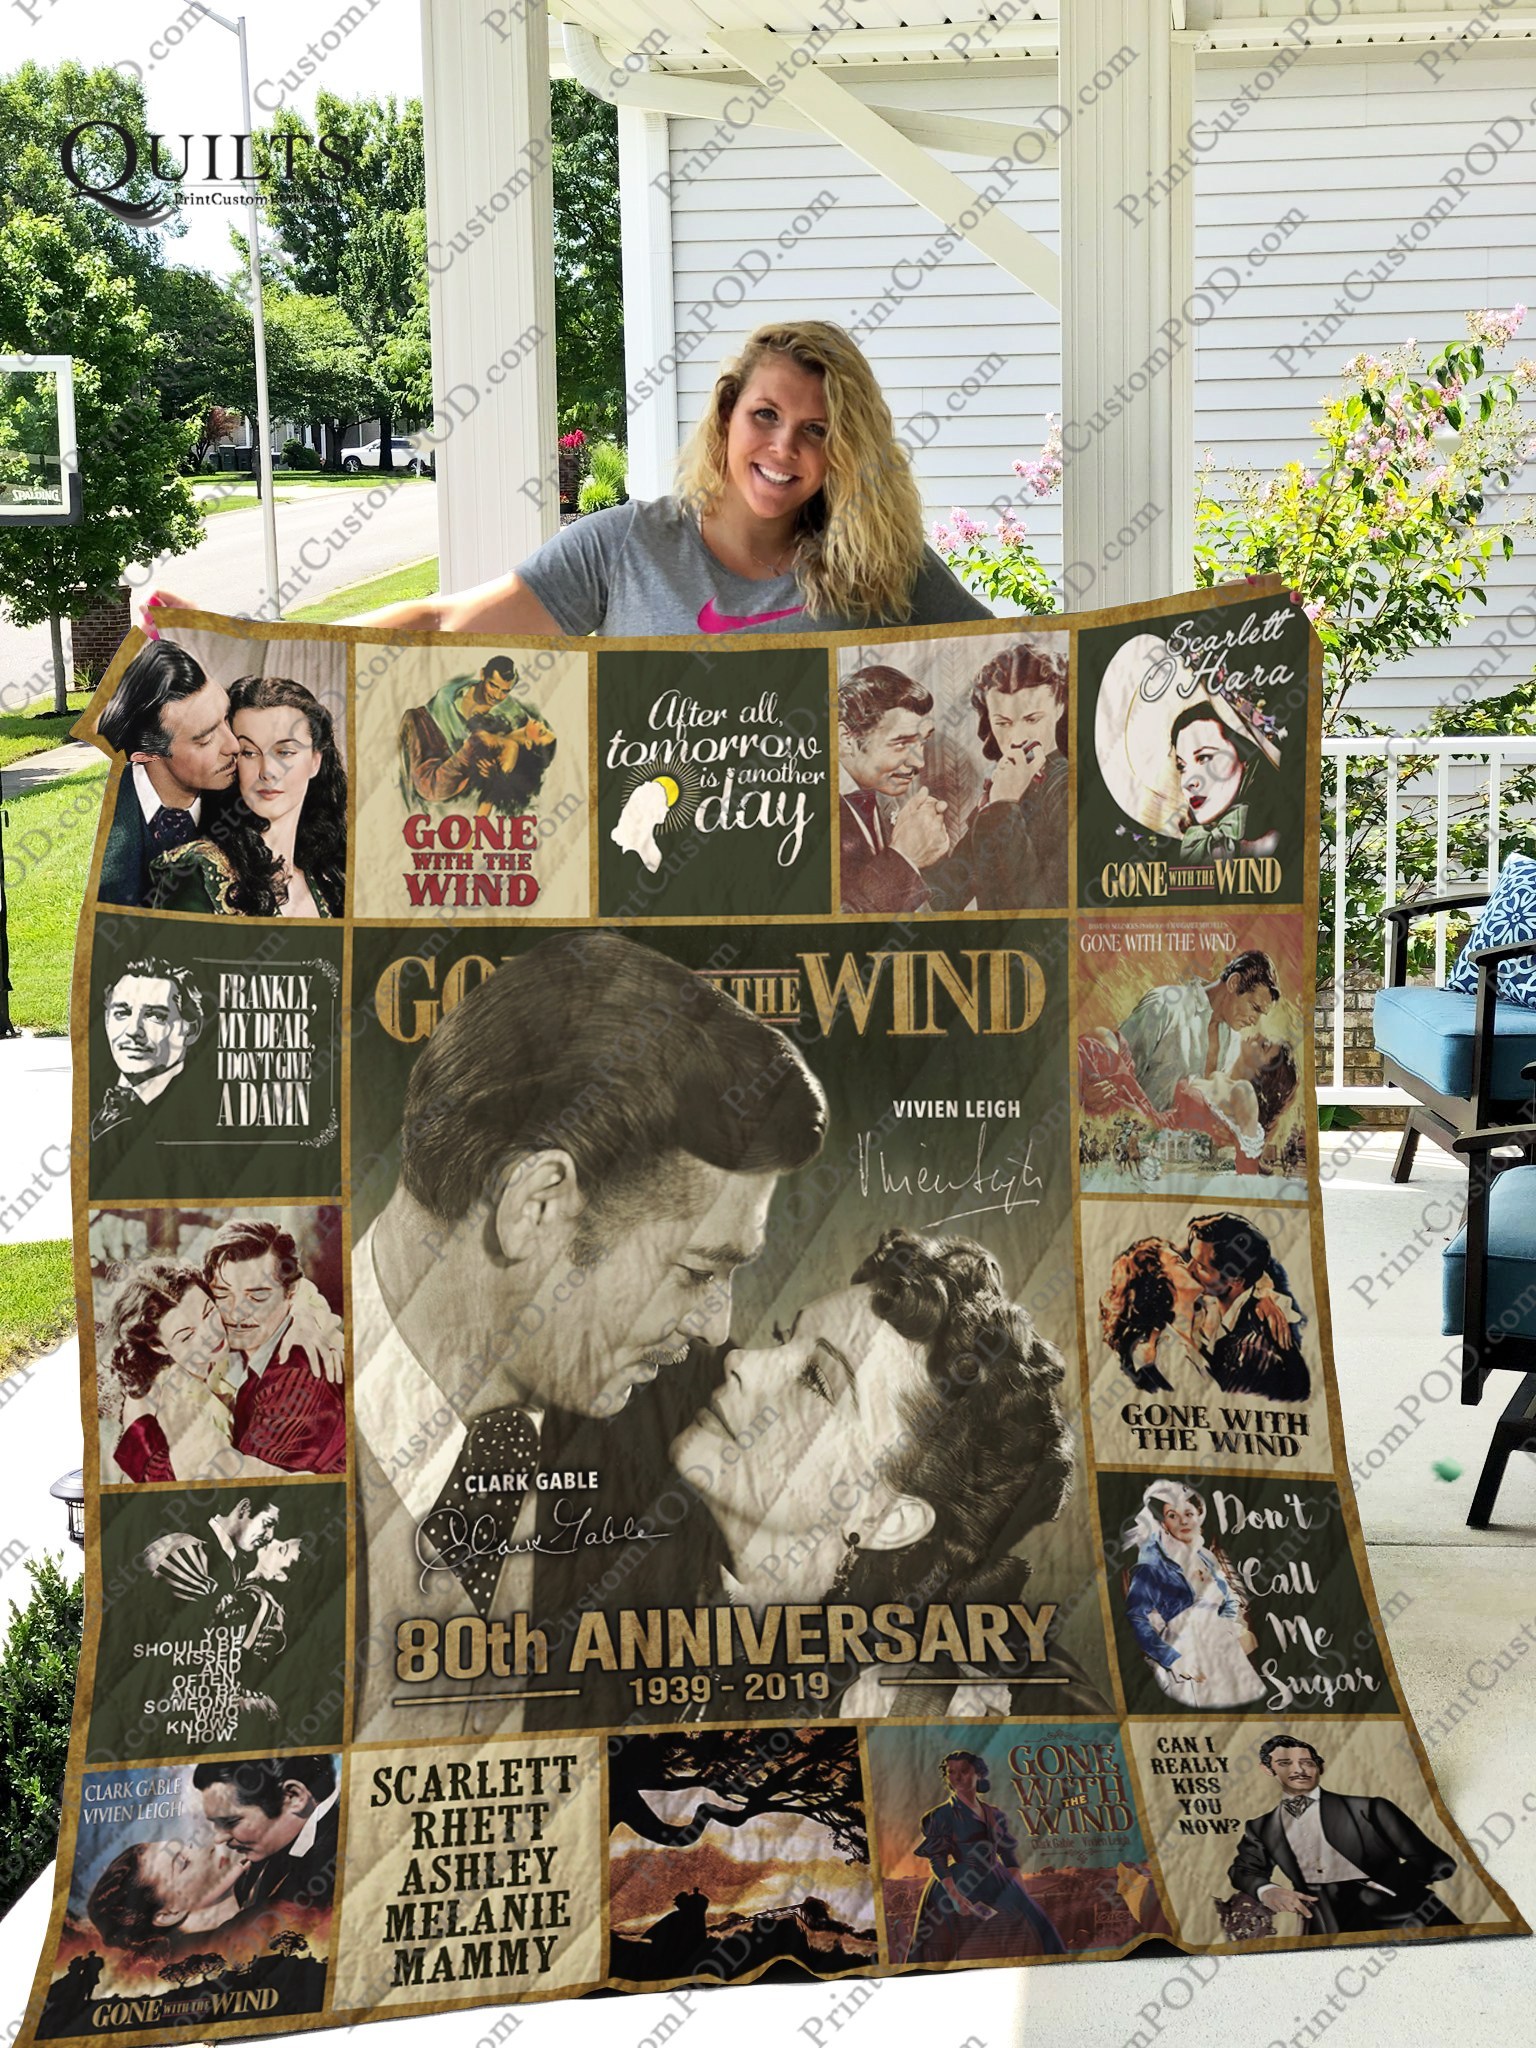 Gone with the wind 80th anniversary quilt 3